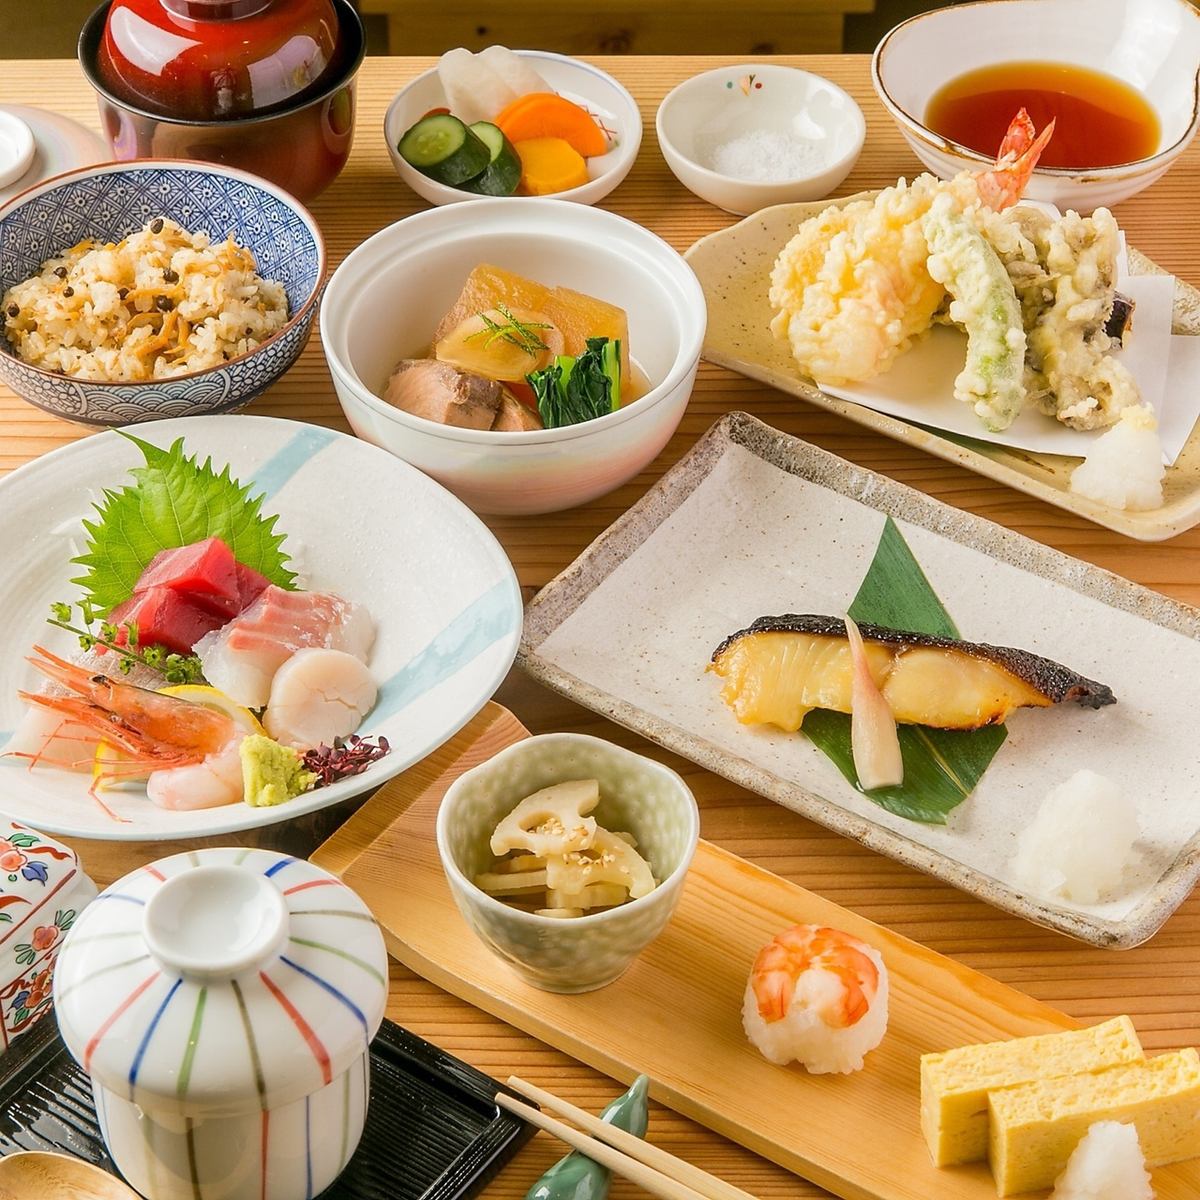 Rich seasonal specialties and branded sake that feel the changing seasons